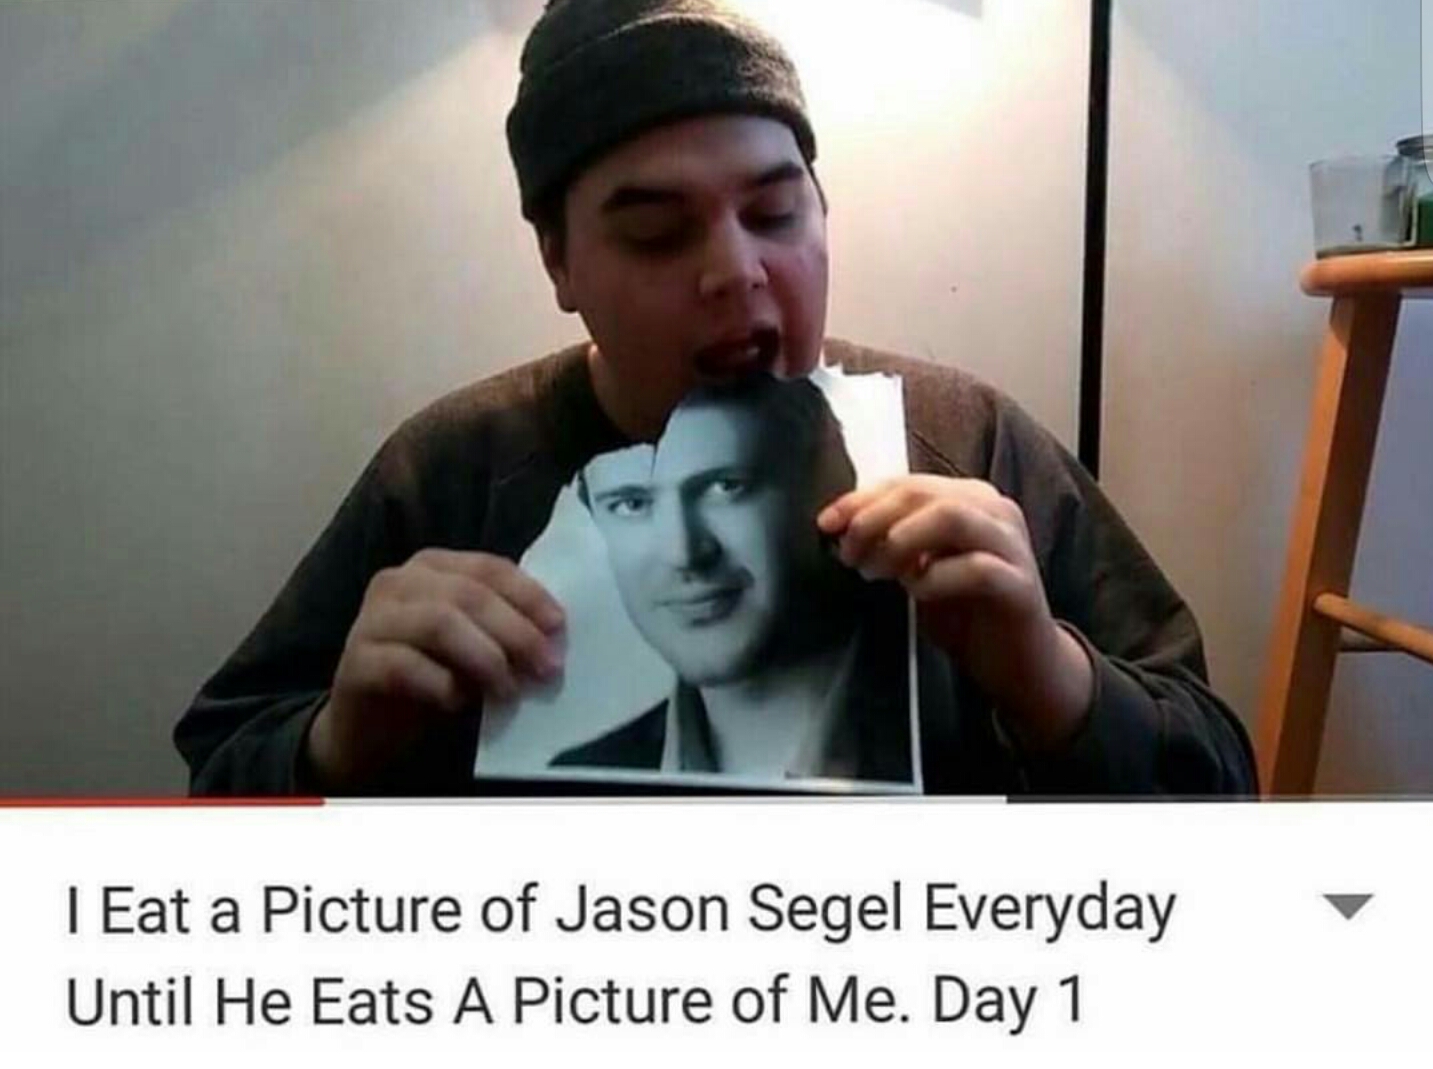 photo caption - I Eat a Picture of Jason Segel Everyday Until He Eats A Picture of Me. Day 1